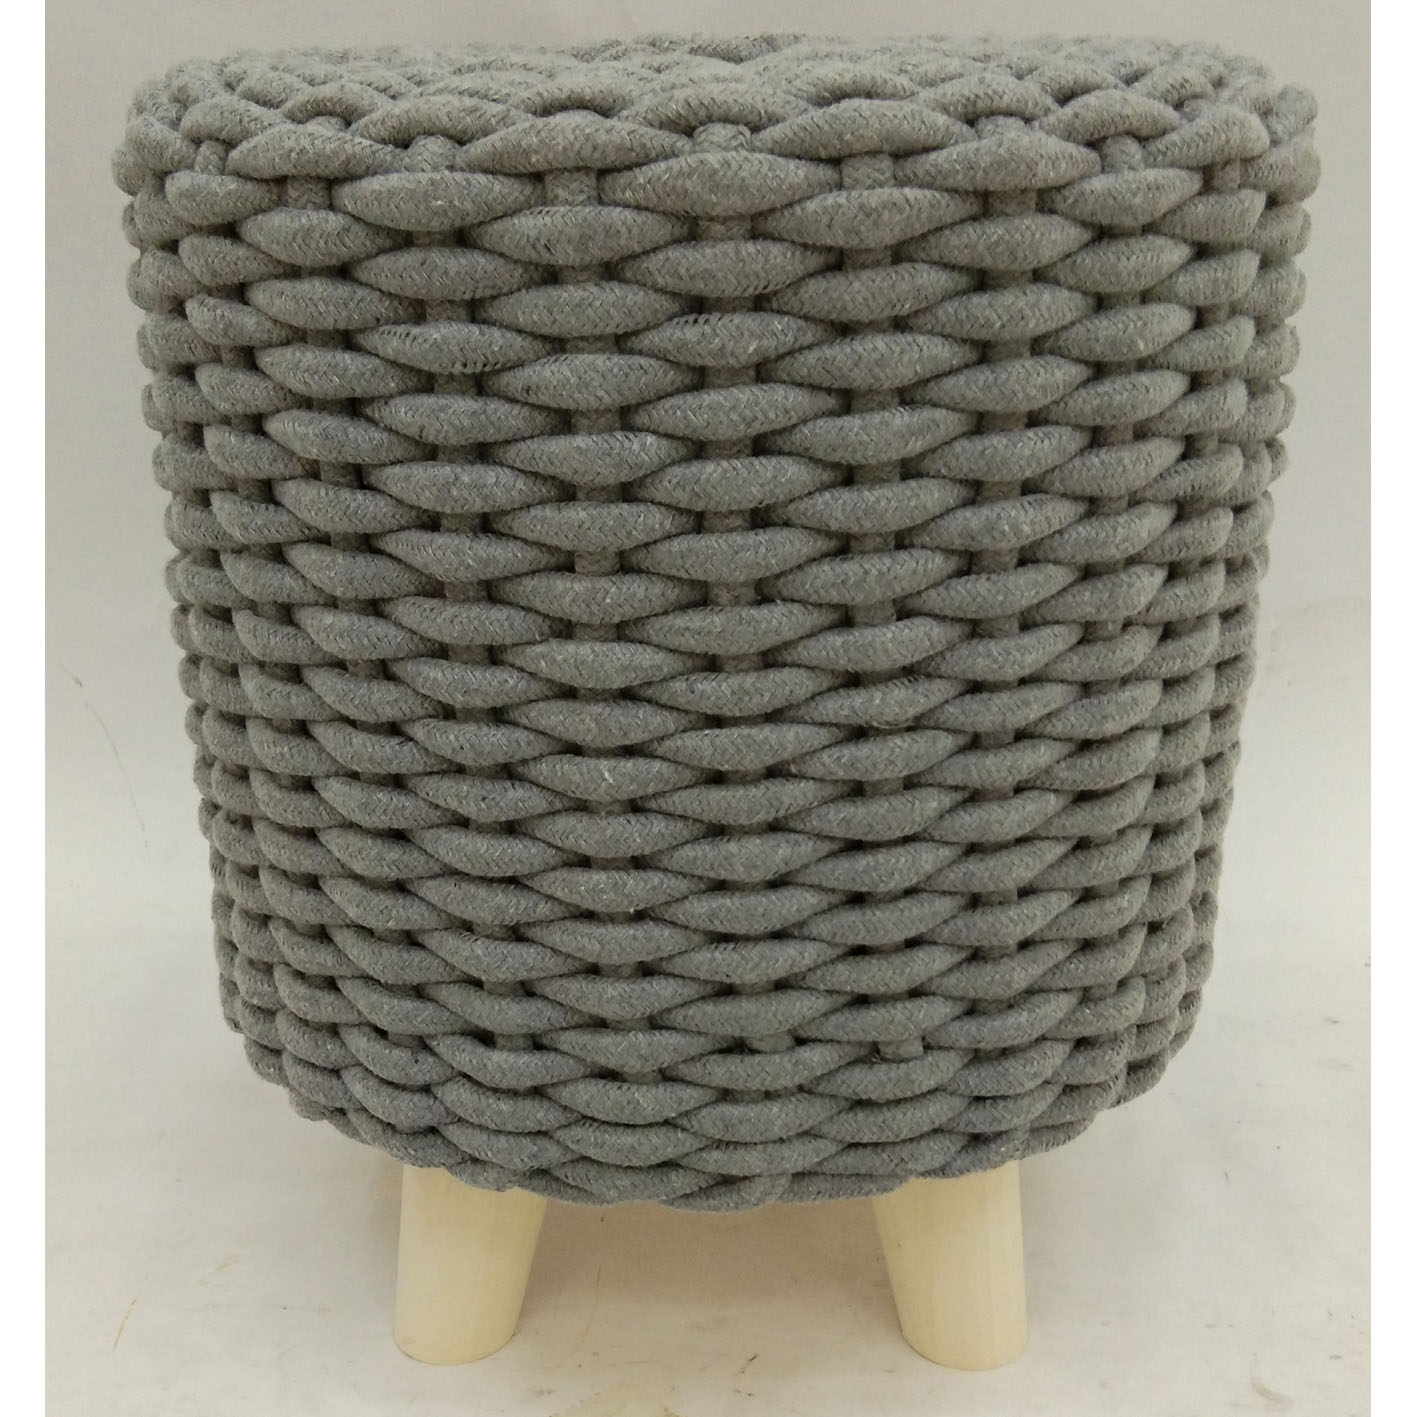 Cotton rope weaving ottoman with wood legs